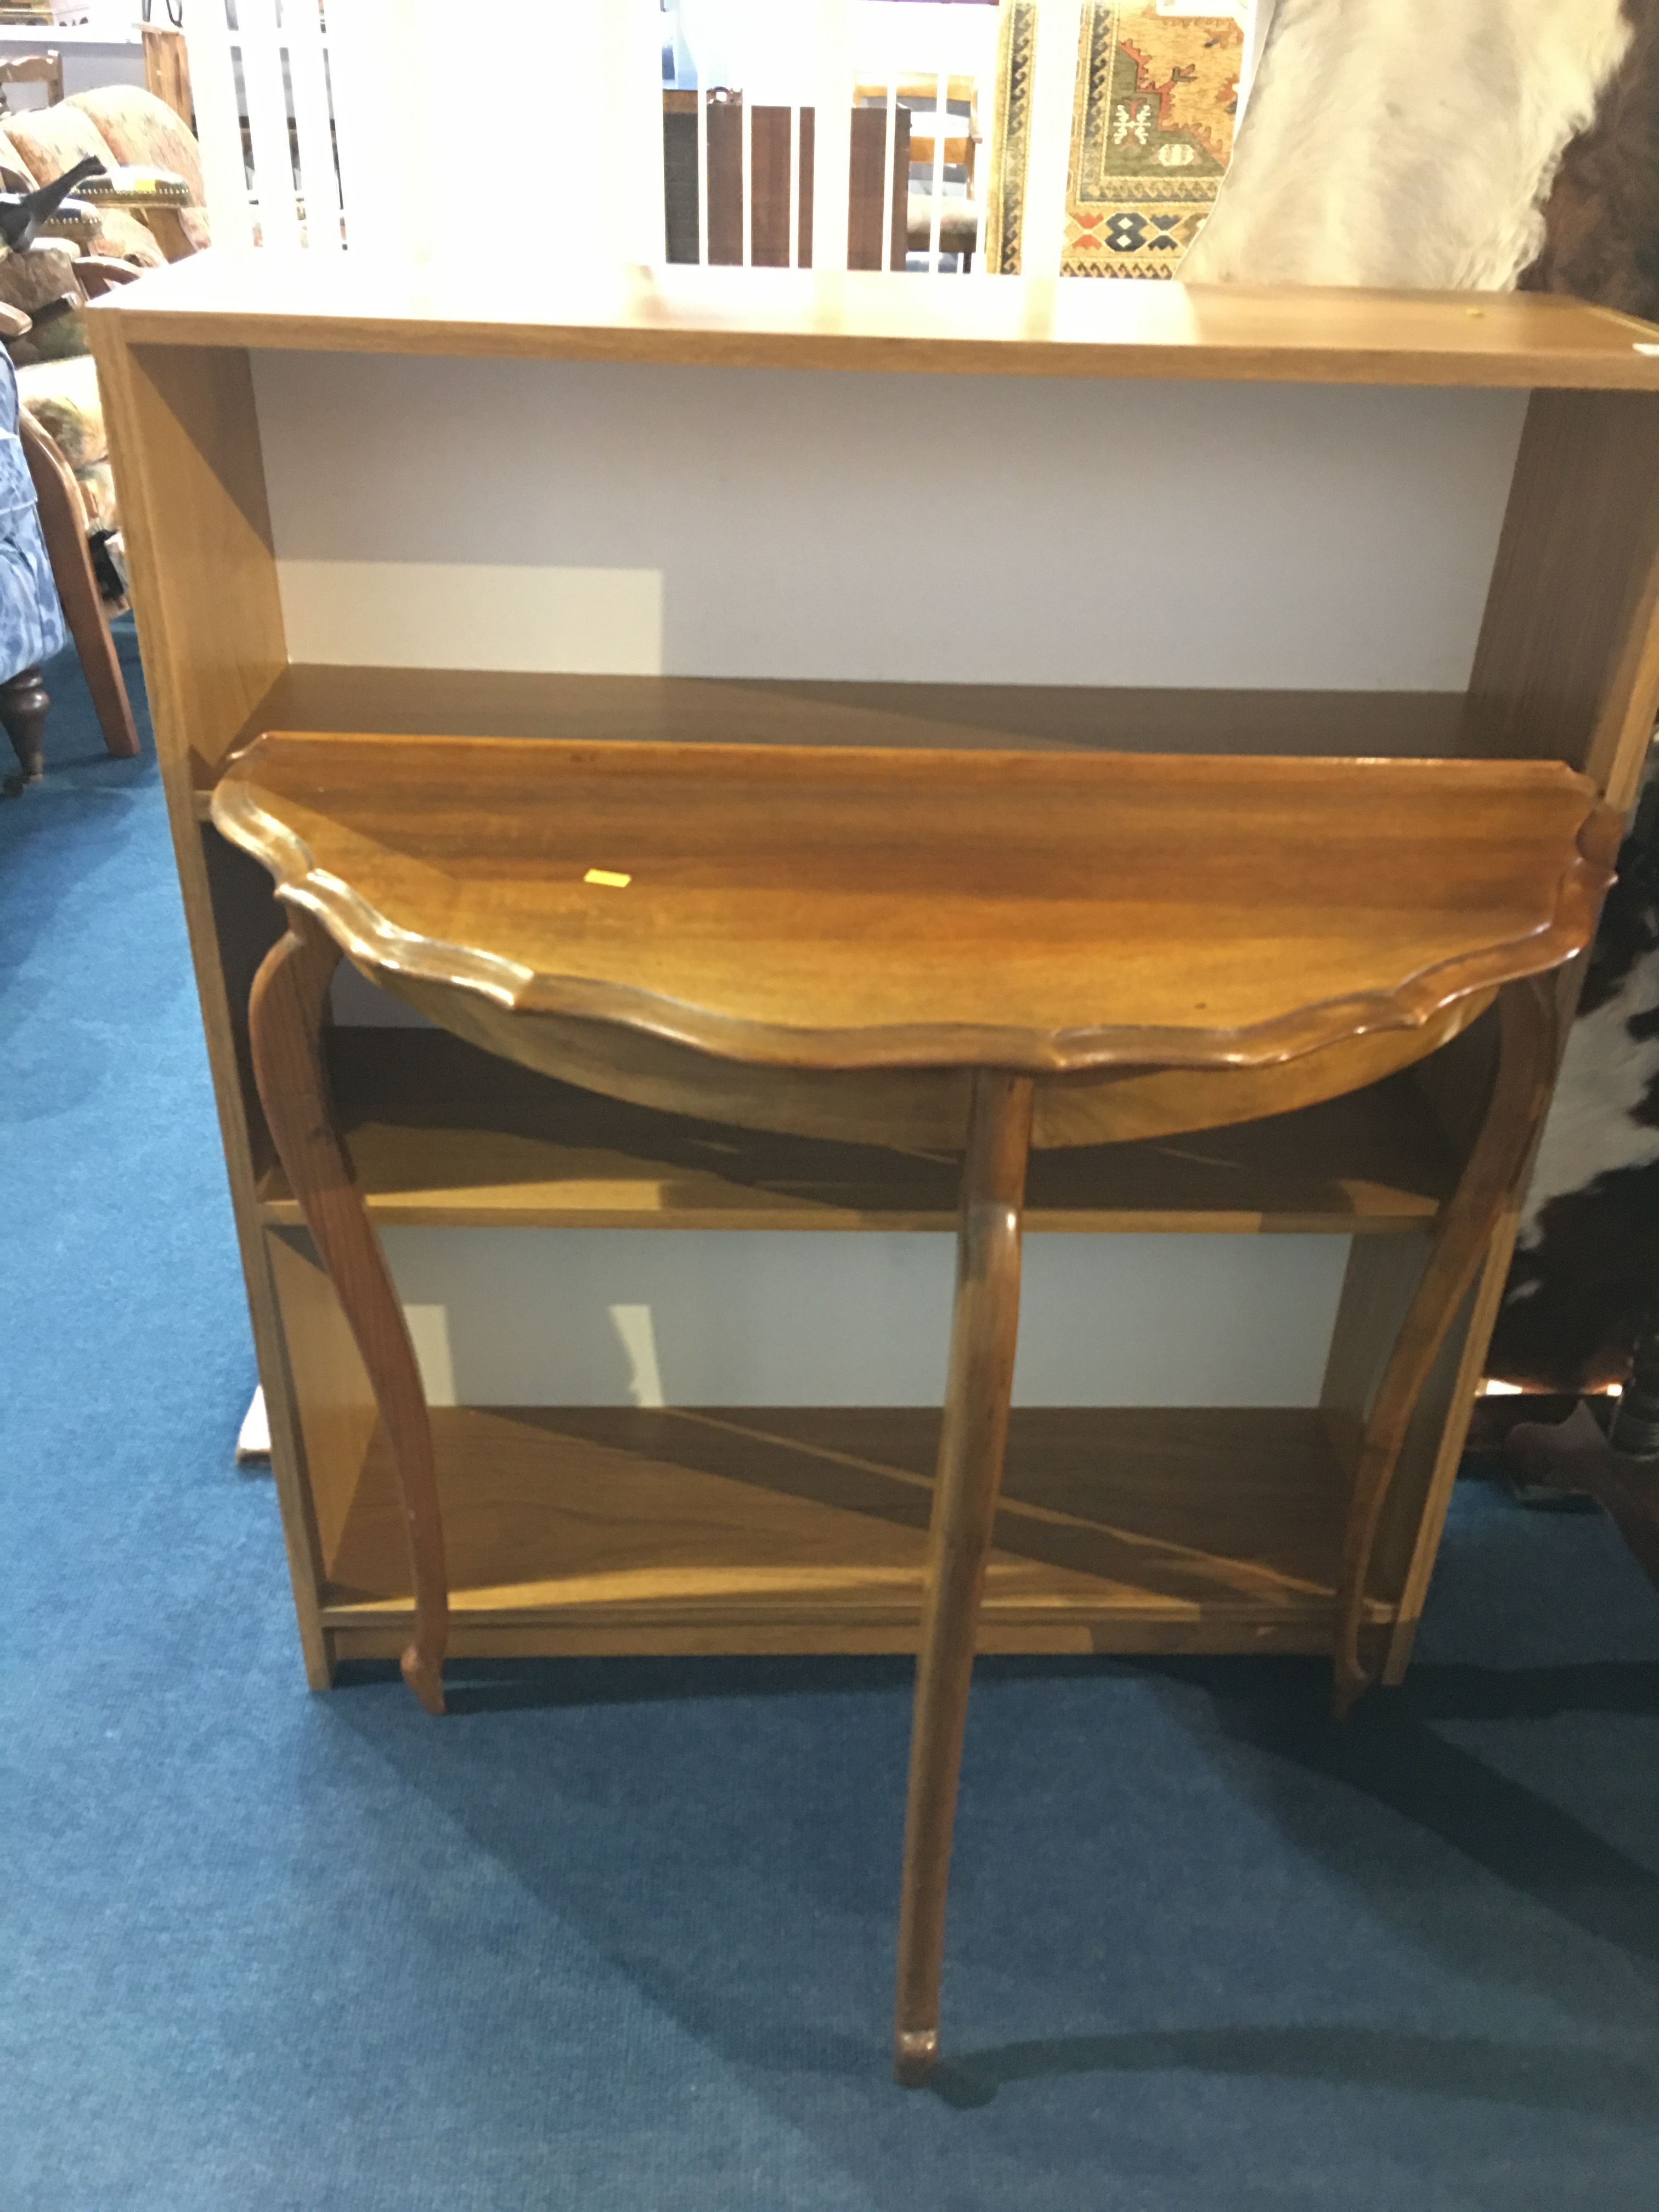 A half moon table and a bookcase